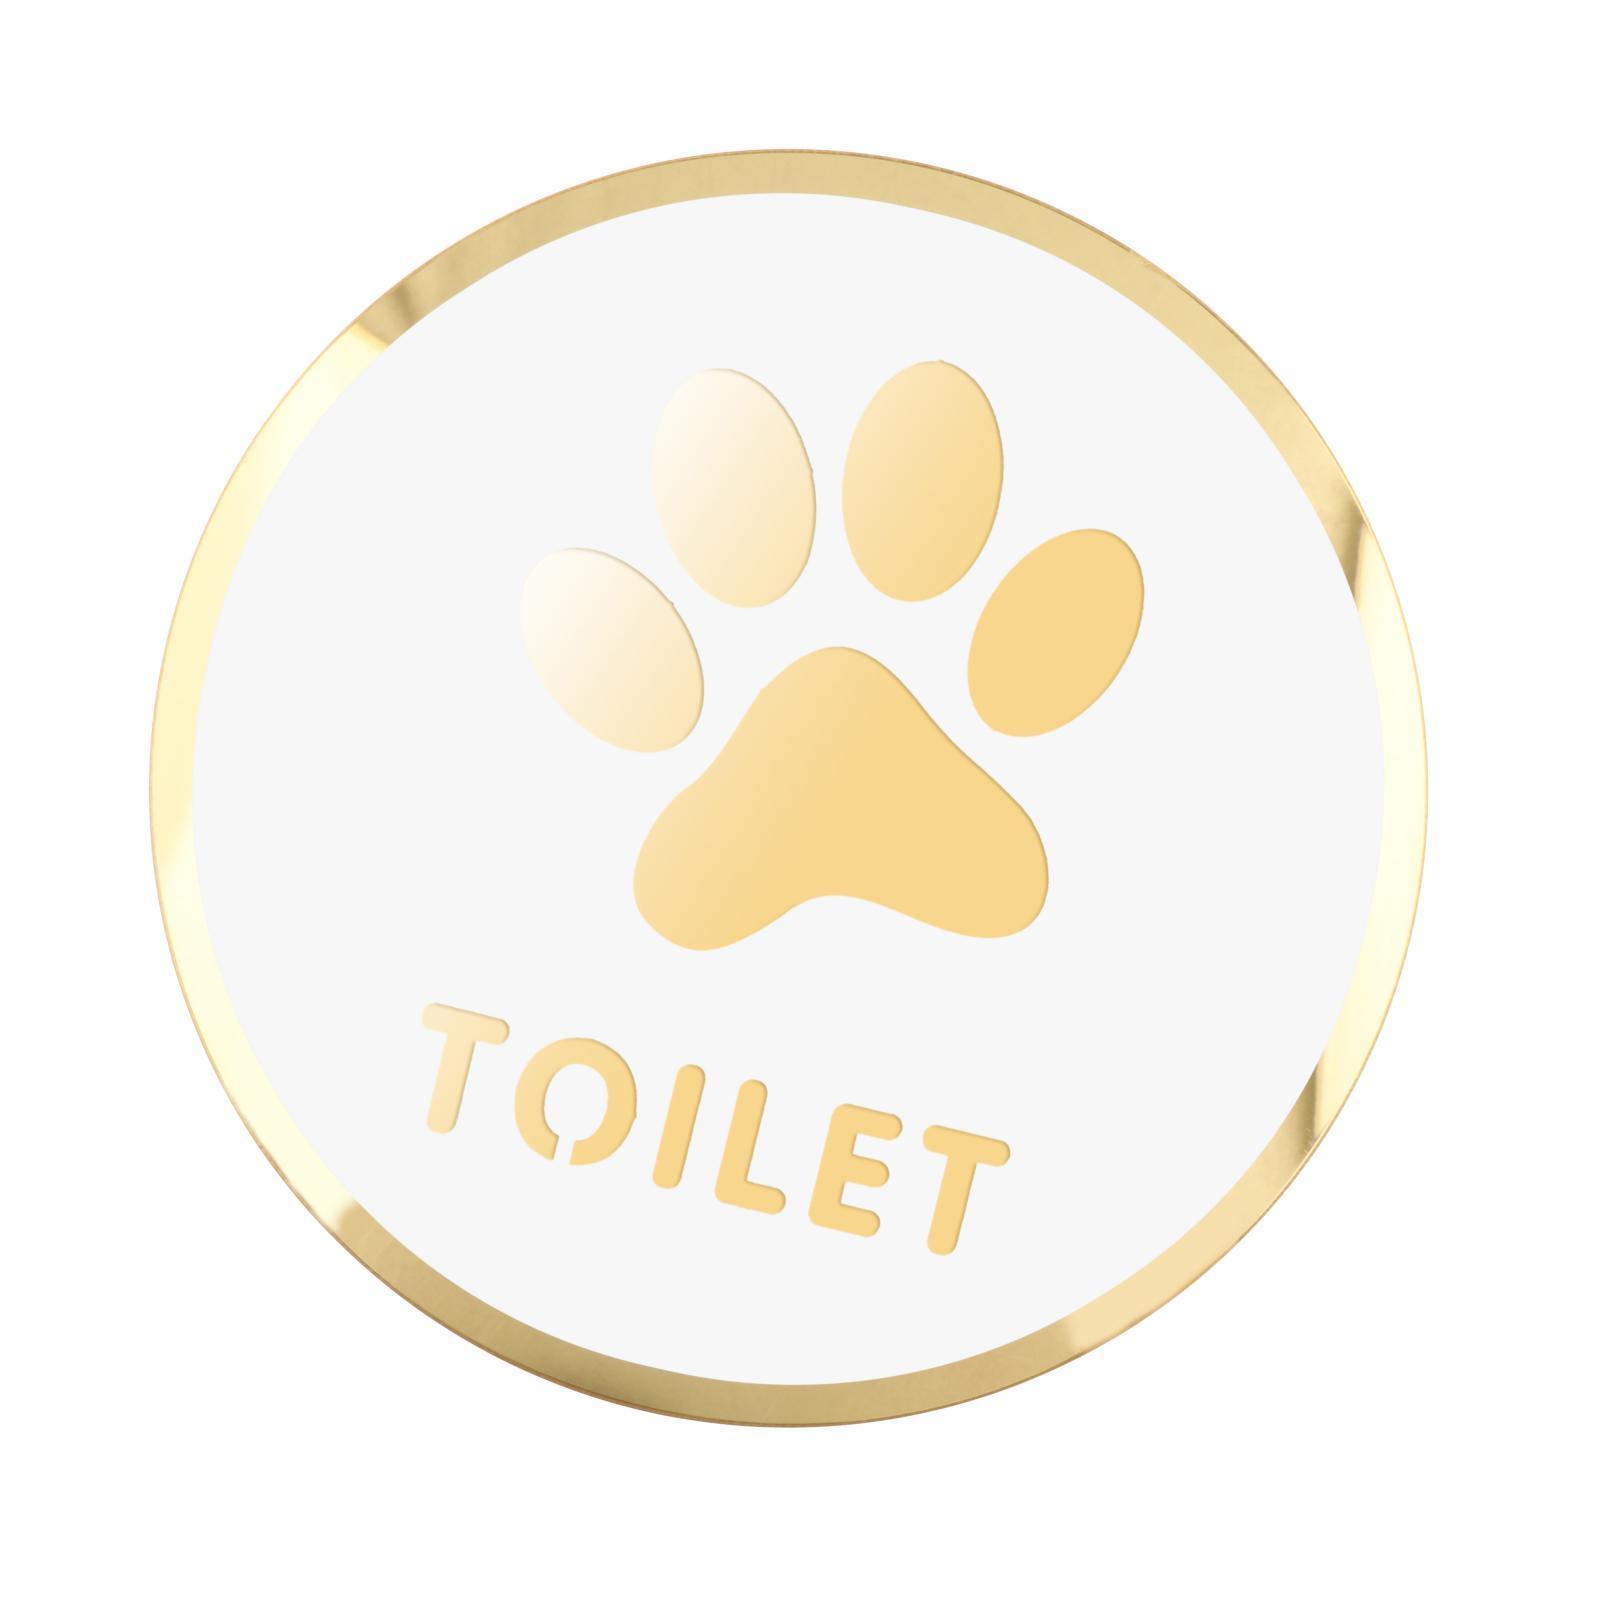 Toilet Sign Toilet Symbol Sticker Plaque Wall Decor Acrylic Bathroom Door Signage Restroom Sign for Public Place Commercial Office Home Shop